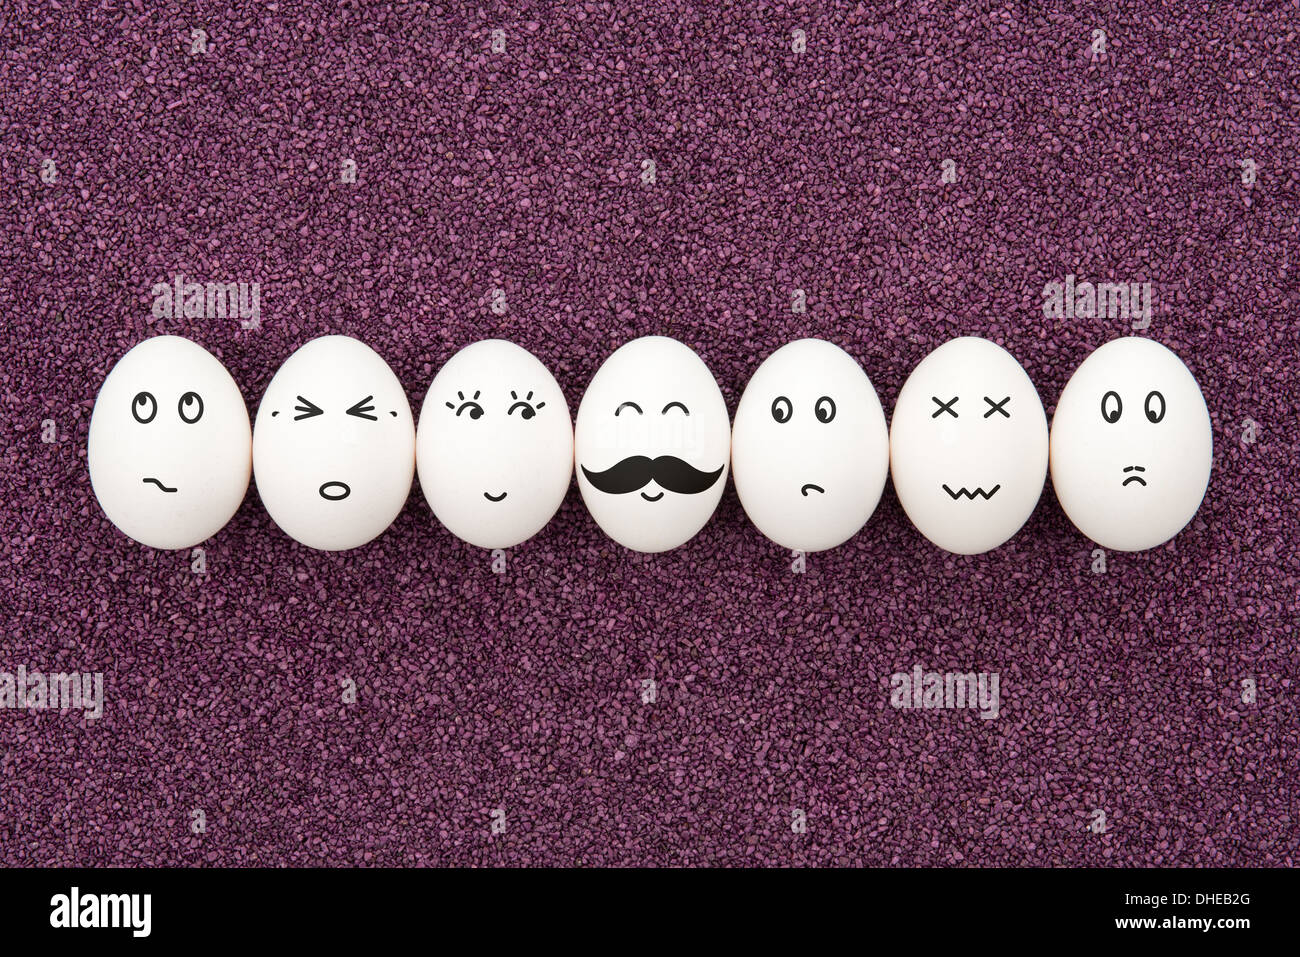 Seven eggs with different facial expressions are lying on the decorative purple sand. Stock Photo